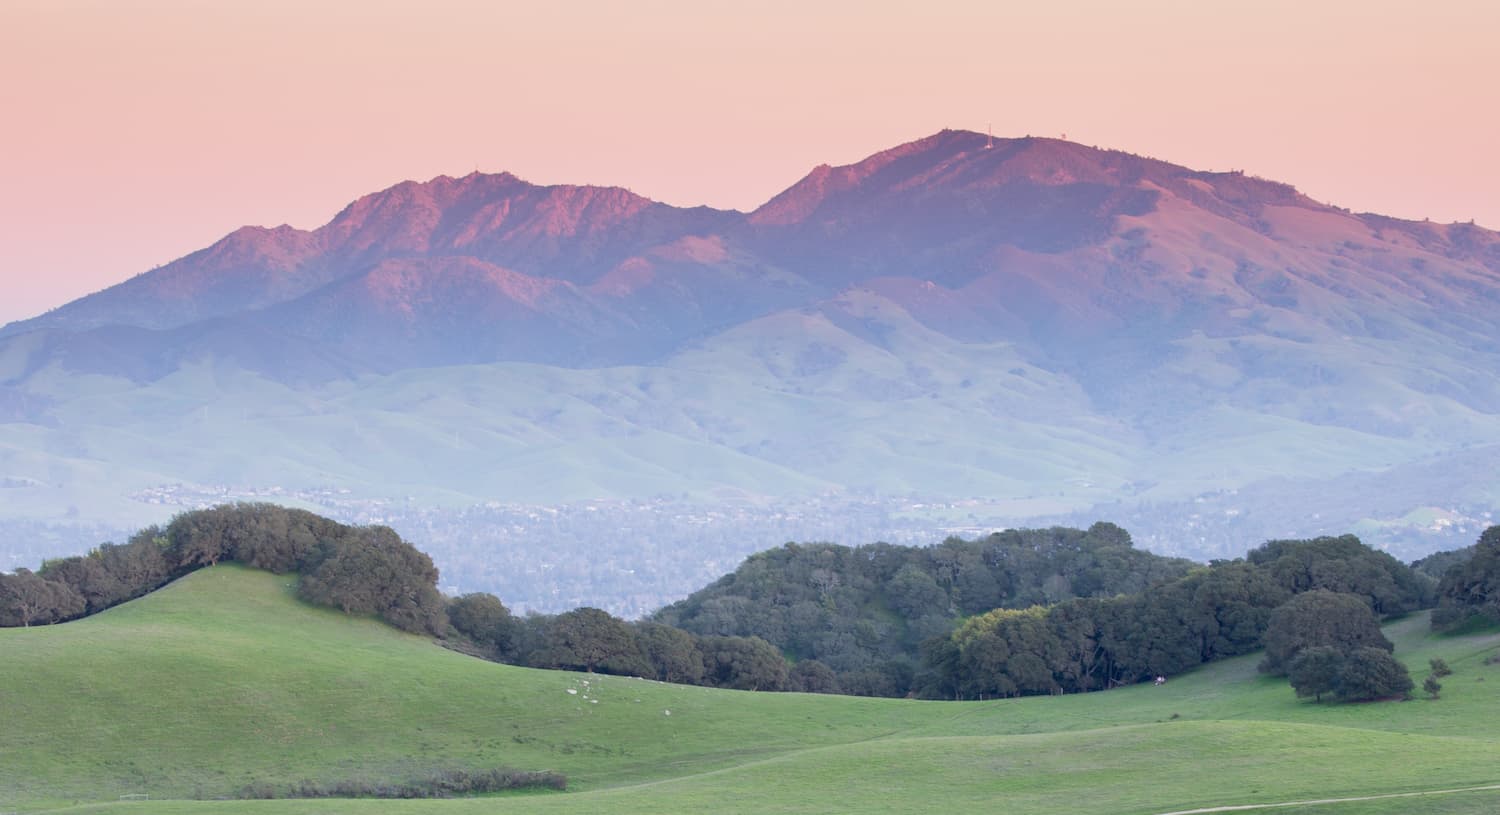 Walnut Creek California countryside with mountain in background